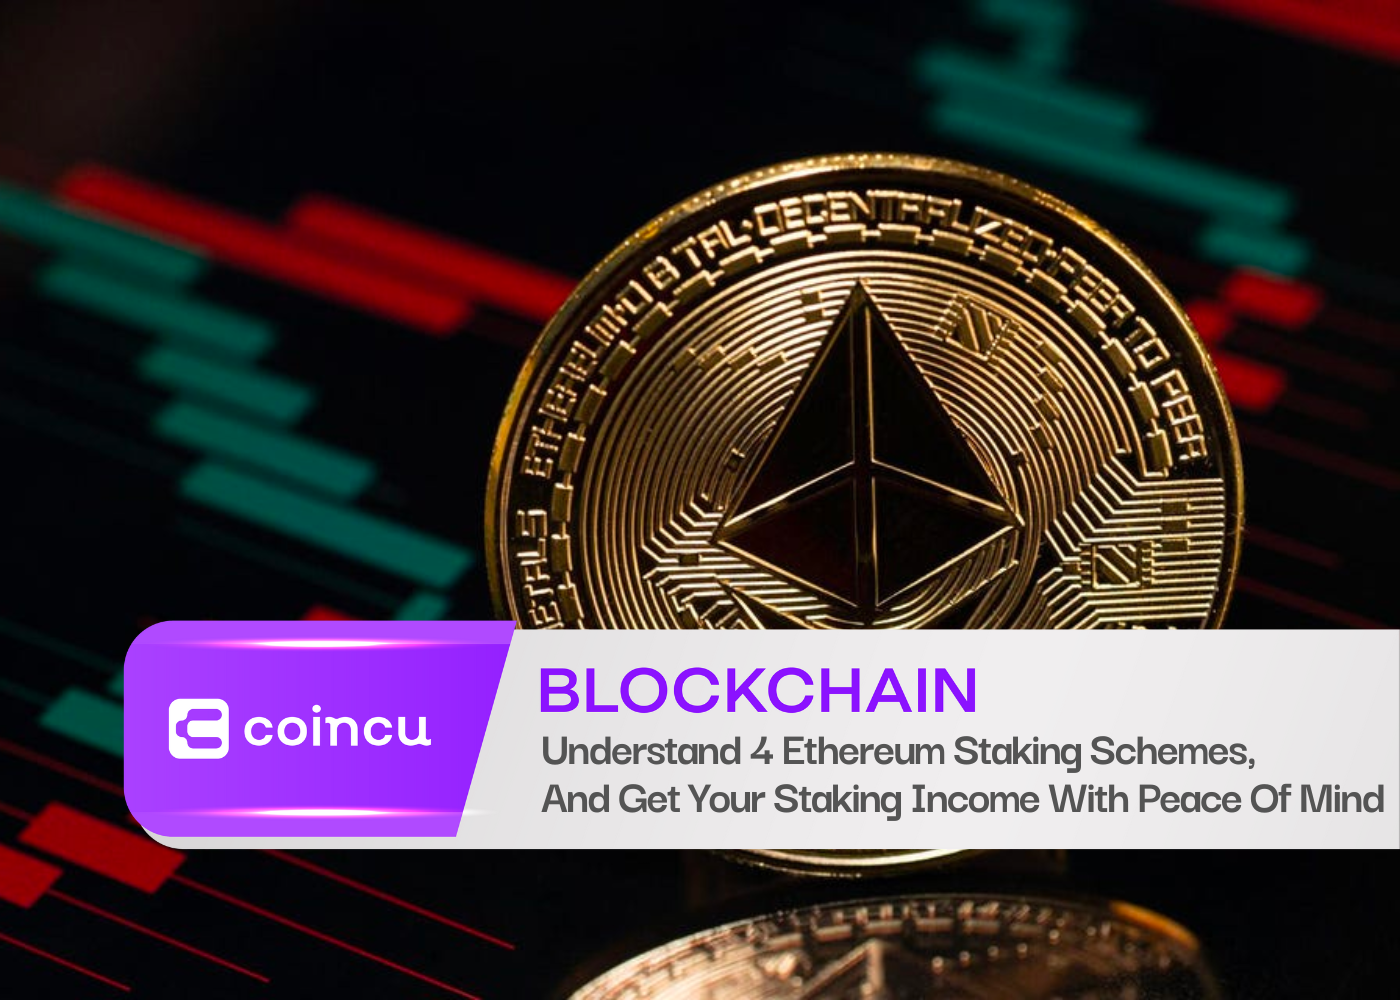 Understand 4 Ethereum Staking Schemes, And Get Your Staking Income With Peace Of Mind